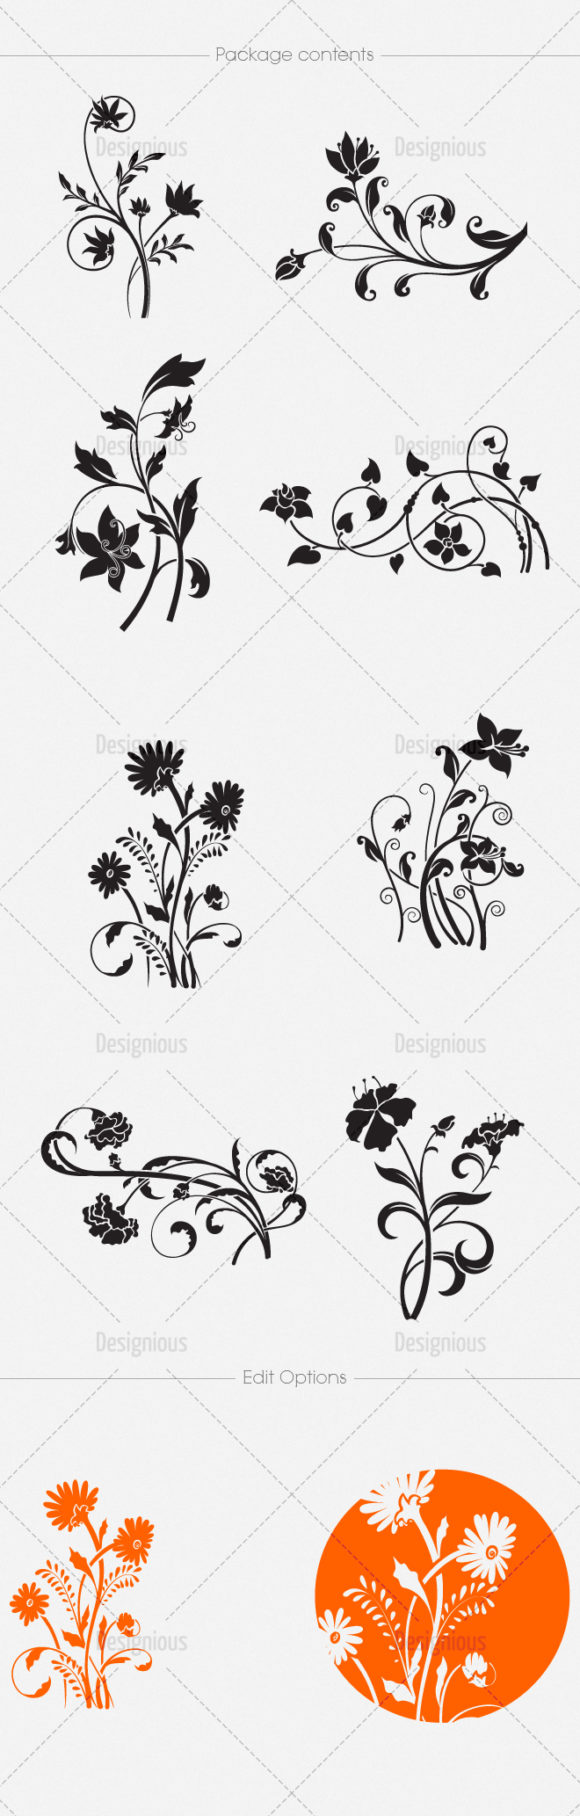 Floral Vector Pack 116 2